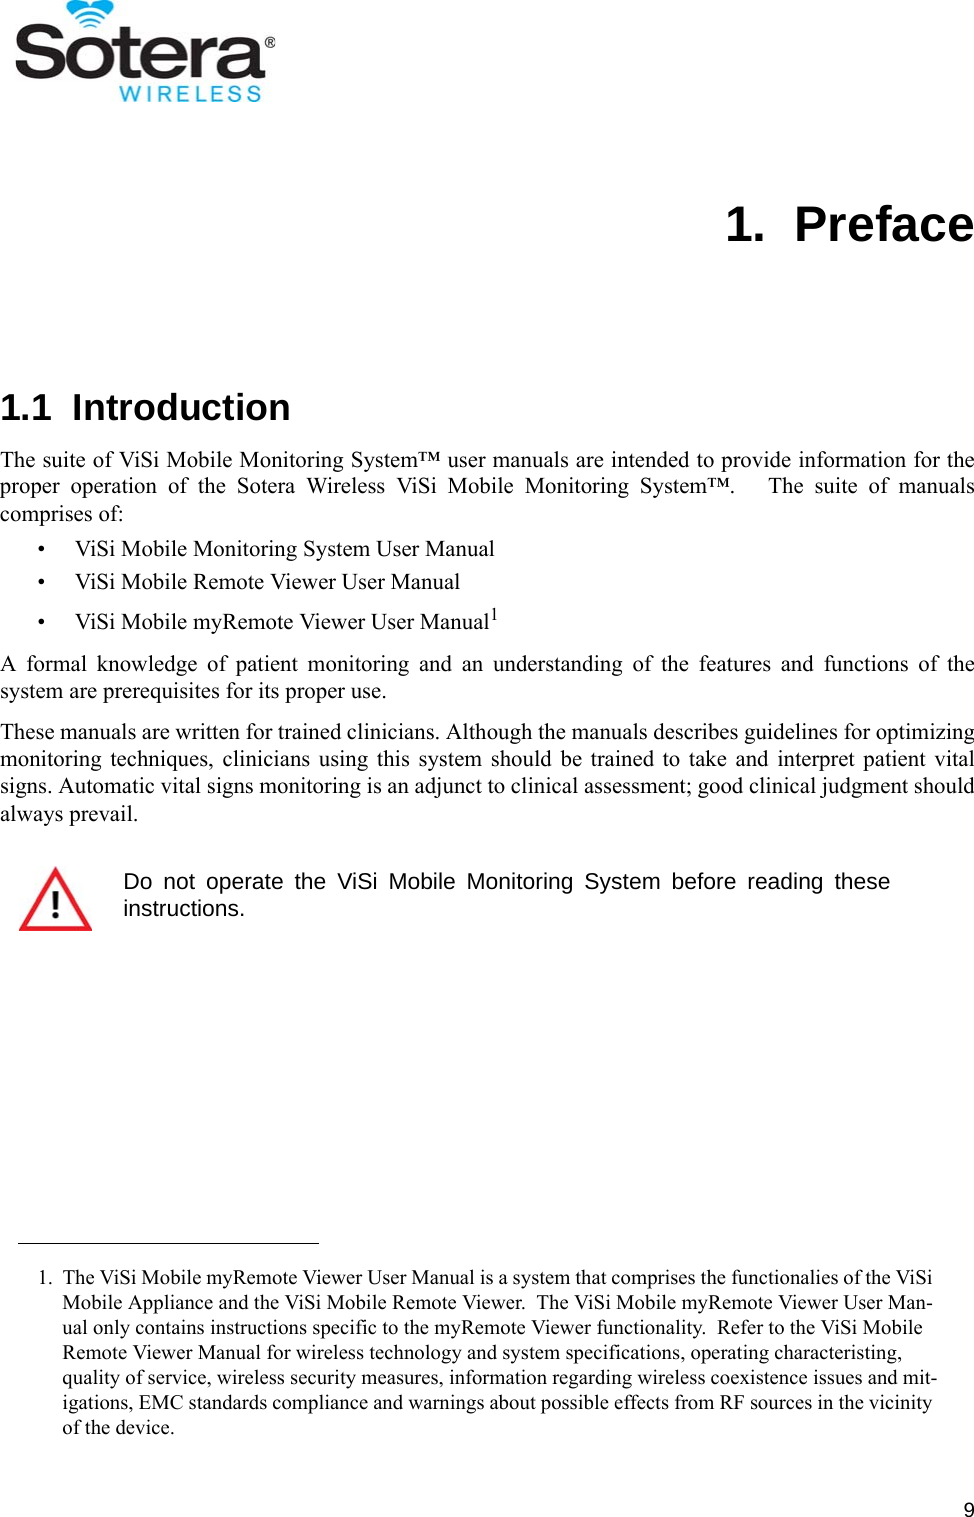 91.  Preface1.1  IntroductionThe suite of ViSi Mobile Monitoring System™ user manuals are intended to provide information for theproper operation of the Sotera Wireless ViSi Mobile Monitoring System™.   The suite of manualscomprises of:• ViSi Mobile Monitoring System User Manual• ViSi Mobile Remote Viewer User Manual• ViSi Mobile myRemote Viewer User Manual1A formal knowledge of patient monitoring and an understanding of the features and functions of thesystem are prerequisites for its proper use.These manuals are written for trained clinicians. Although the manuals describes guidelines for optimizingmonitoring techniques, clinicians using this system should be trained to take and interpret patient vitalsigns. Automatic vital signs monitoring is an adjunct to clinical assessment; good clinical judgment shouldalways prevail.1. The ViSi Mobile myRemote Viewer User Manual is a system that comprises the functionalies of the ViSi Mobile Appliance and the ViSi Mobile Remote Viewer.  The ViSi Mobile myRemote Viewer User Man-ual only contains instructions specific to the myRemote Viewer functionality.  Refer to the ViSi Mobile Remote Viewer Manual for wireless technology and system specifications, operating characteristing, quality of service, wireless security measures, information regarding wireless coexistence issues and mit-igations, EMC standards compliance and warnings about possible effects from RF sources in the vicinity of the device.Do not operate the ViSi Mobile Monitoring System before reading theseinstructions.